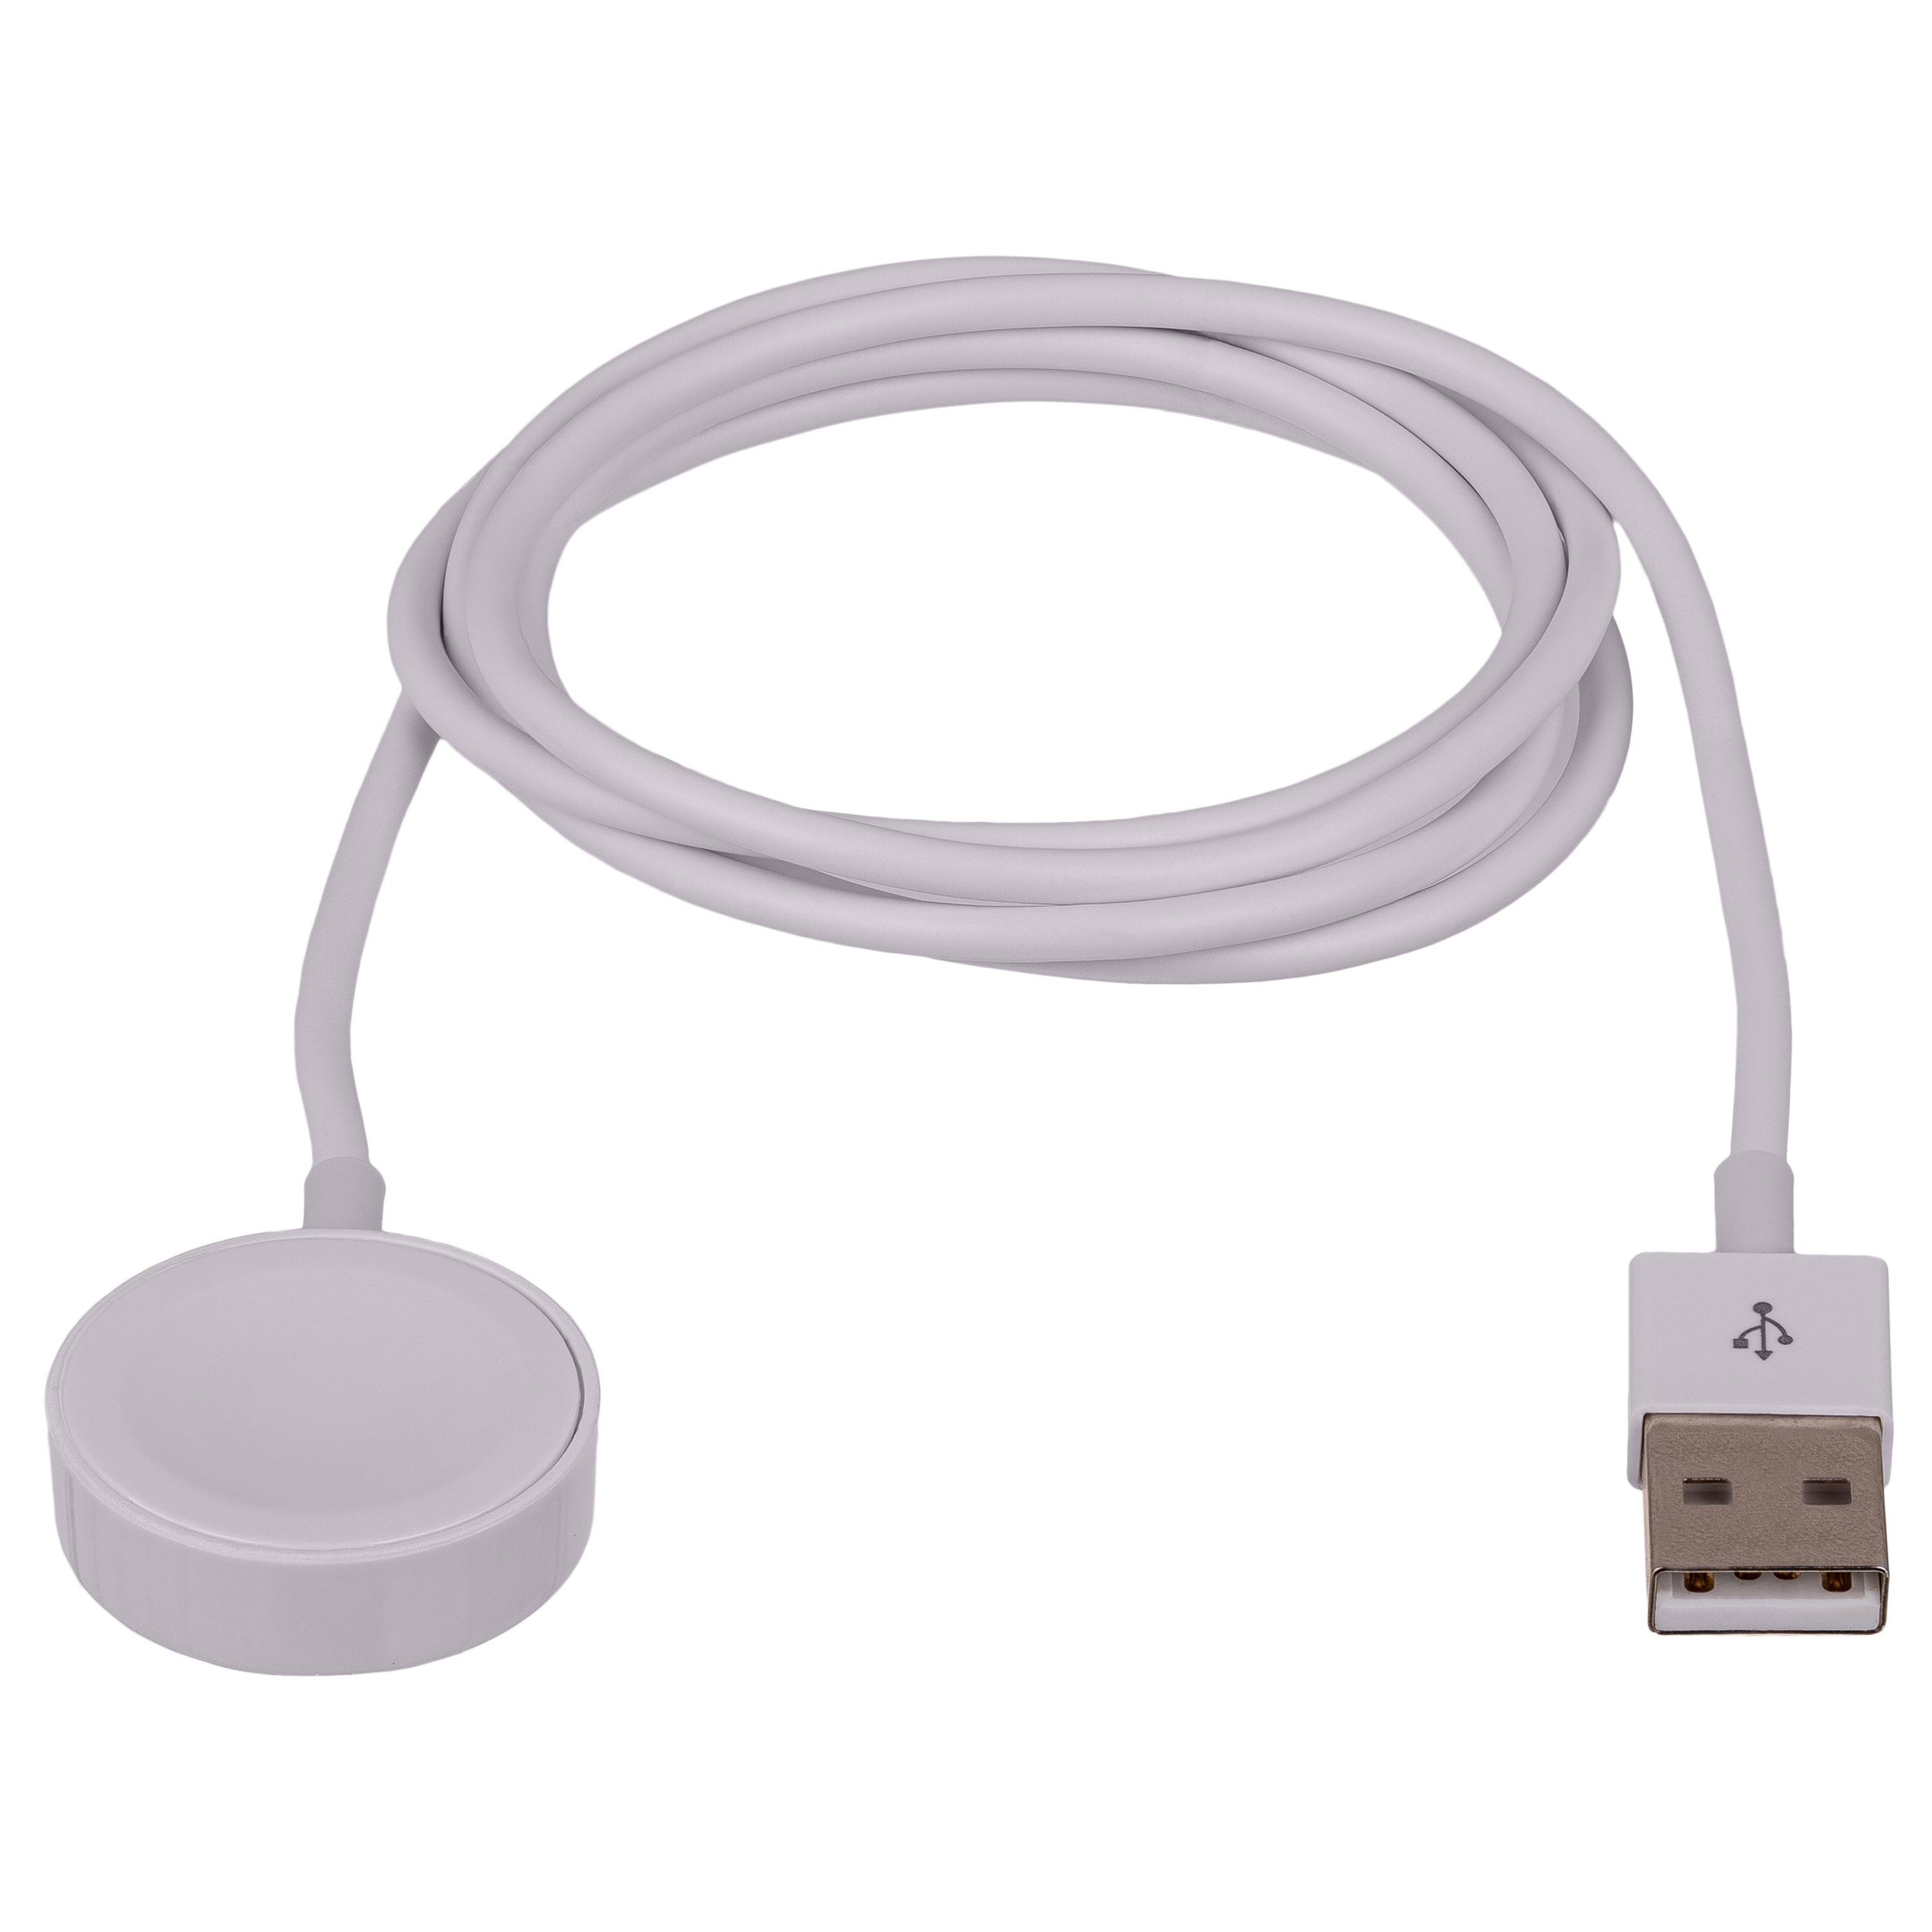  SUMEE Watch Charger Cable Compatible with Apple iWatch